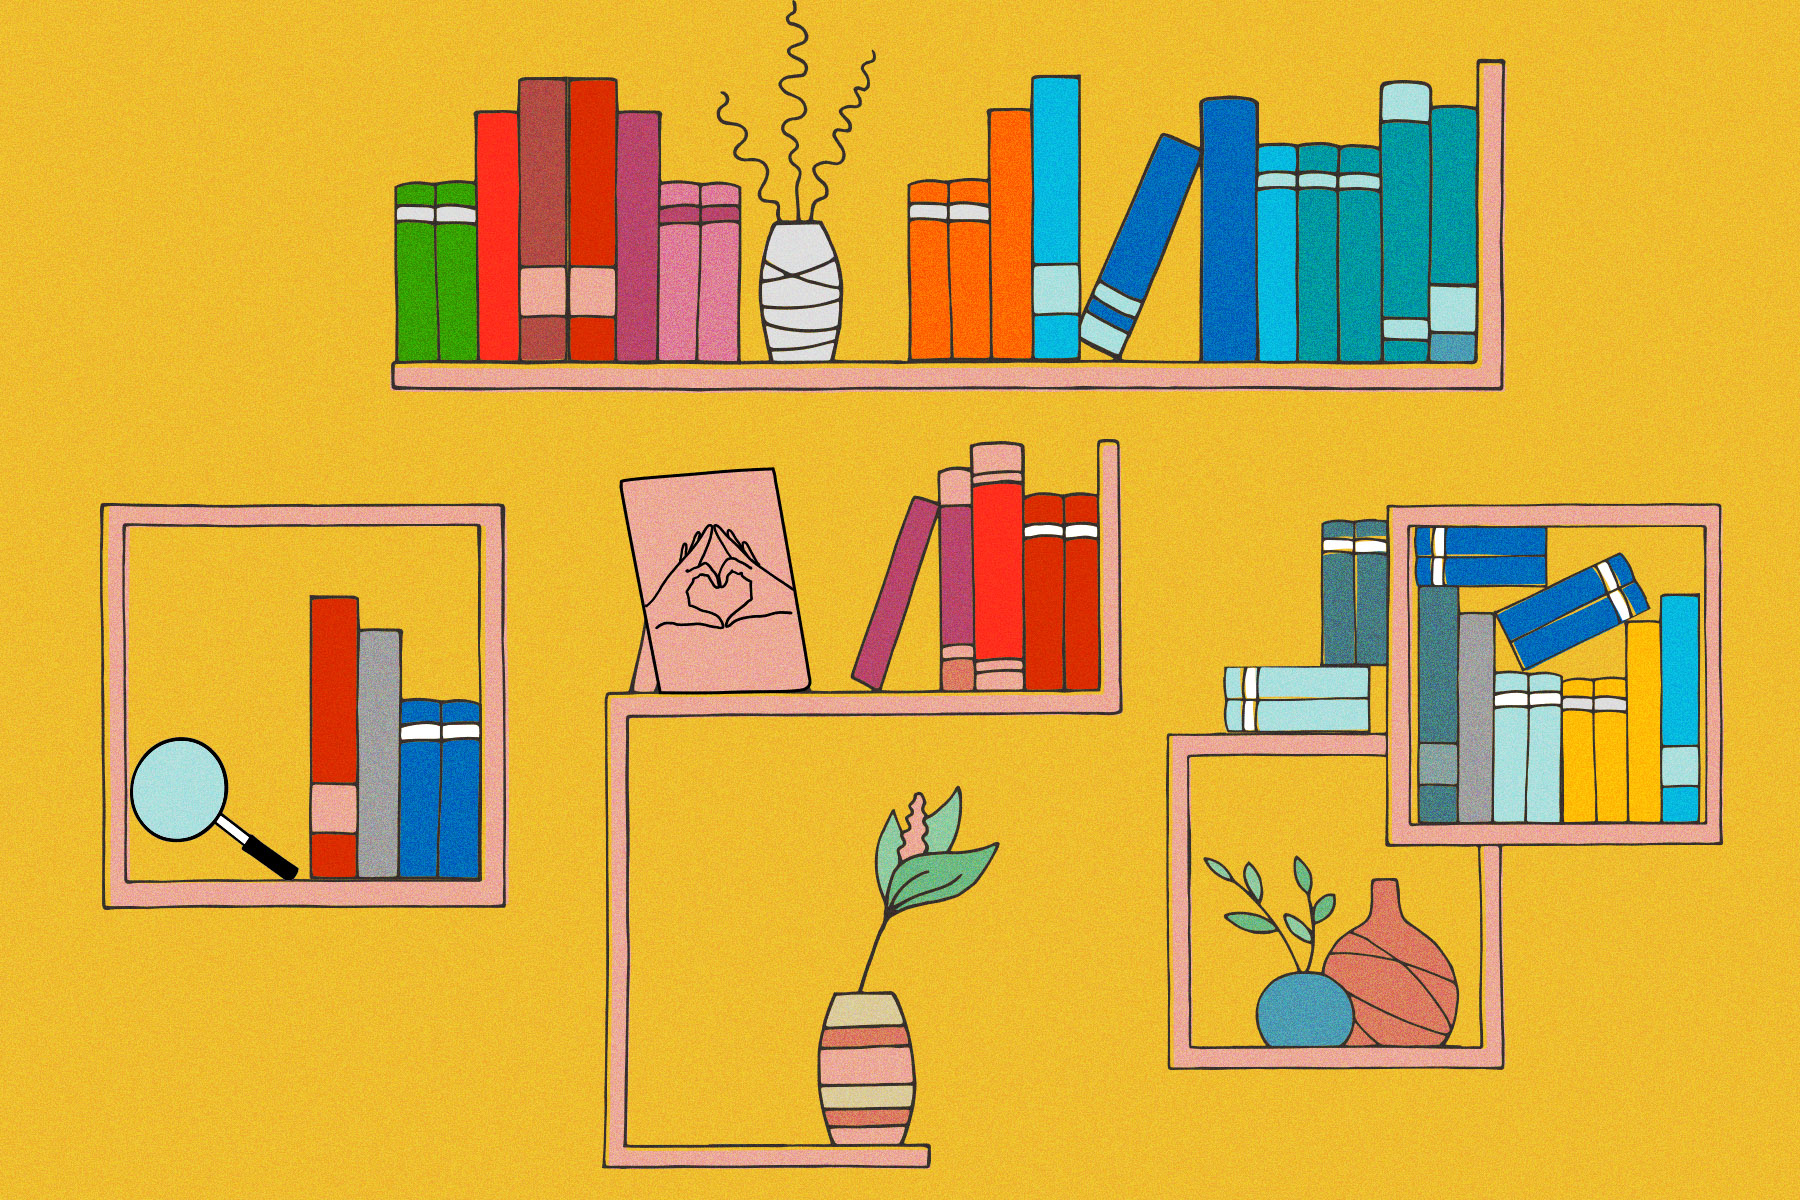 A drawing of a series of bookshelves against a yellow background